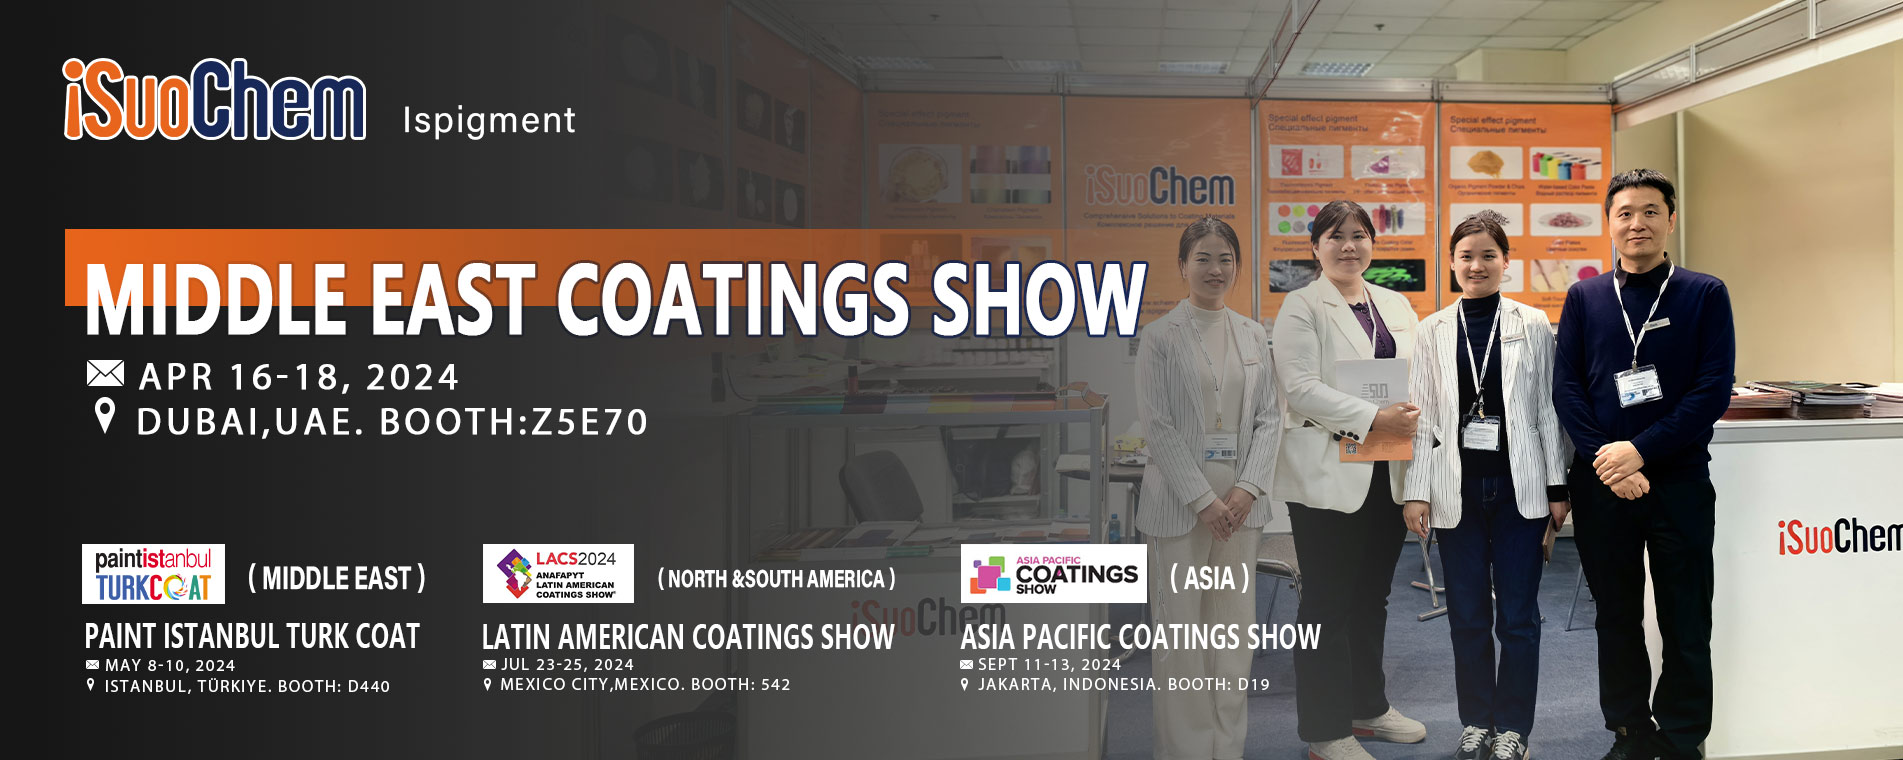 2024 MIDDLE EAST COATINGS SHOW